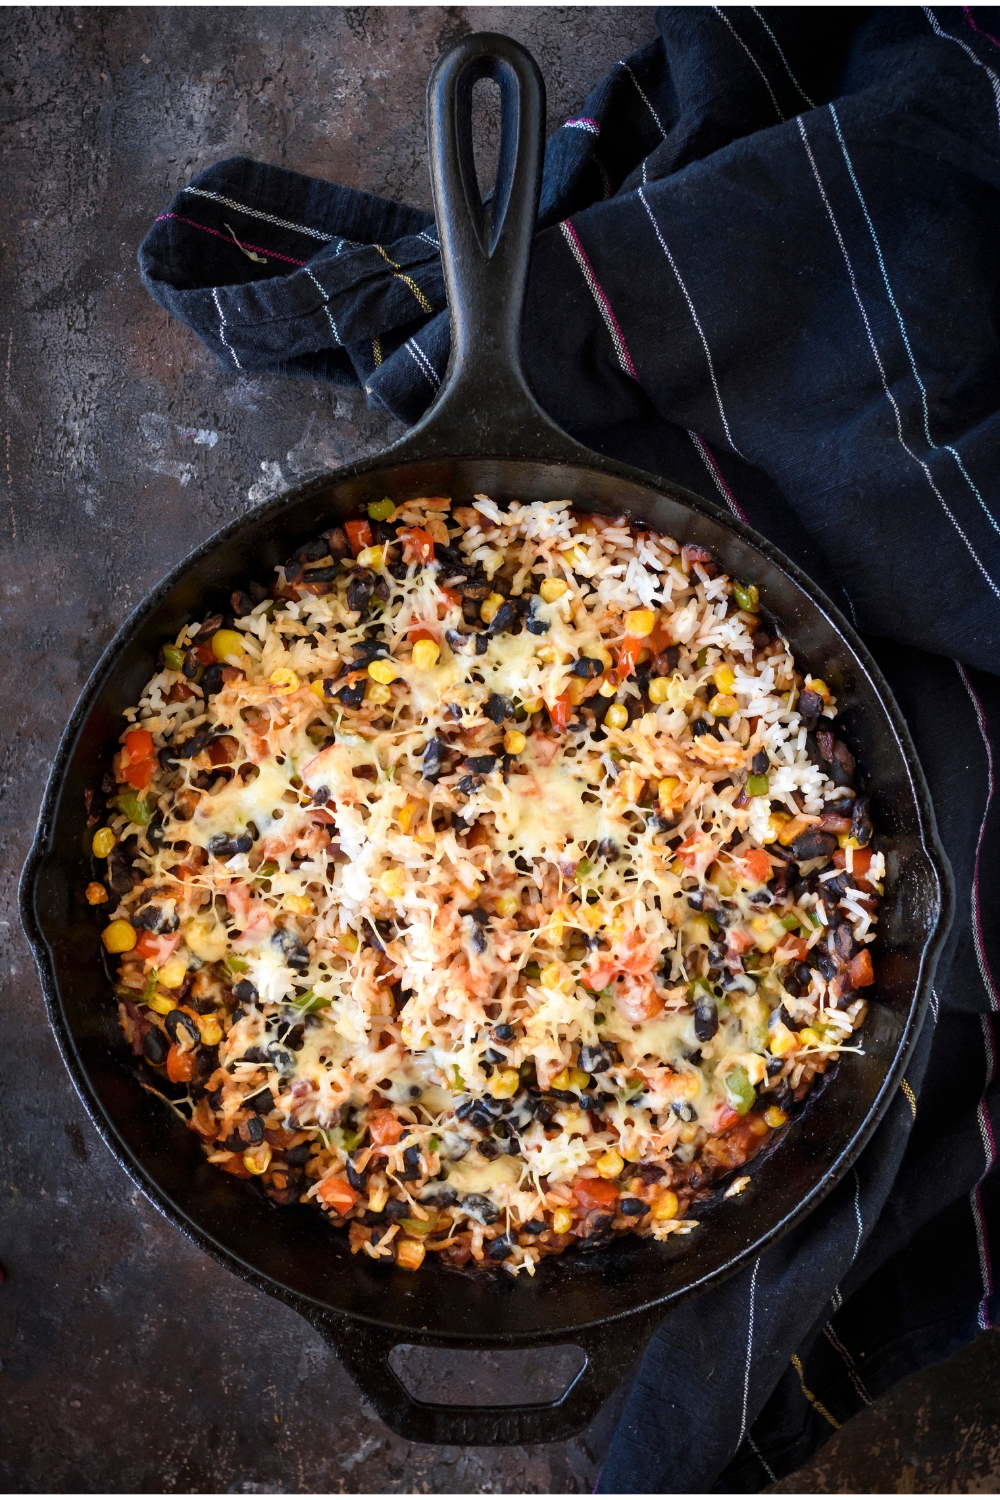 A skillet filled with freshly baked rice casserole covered in melted cheese. There are visible chunks of black beans, corn, and peppers.